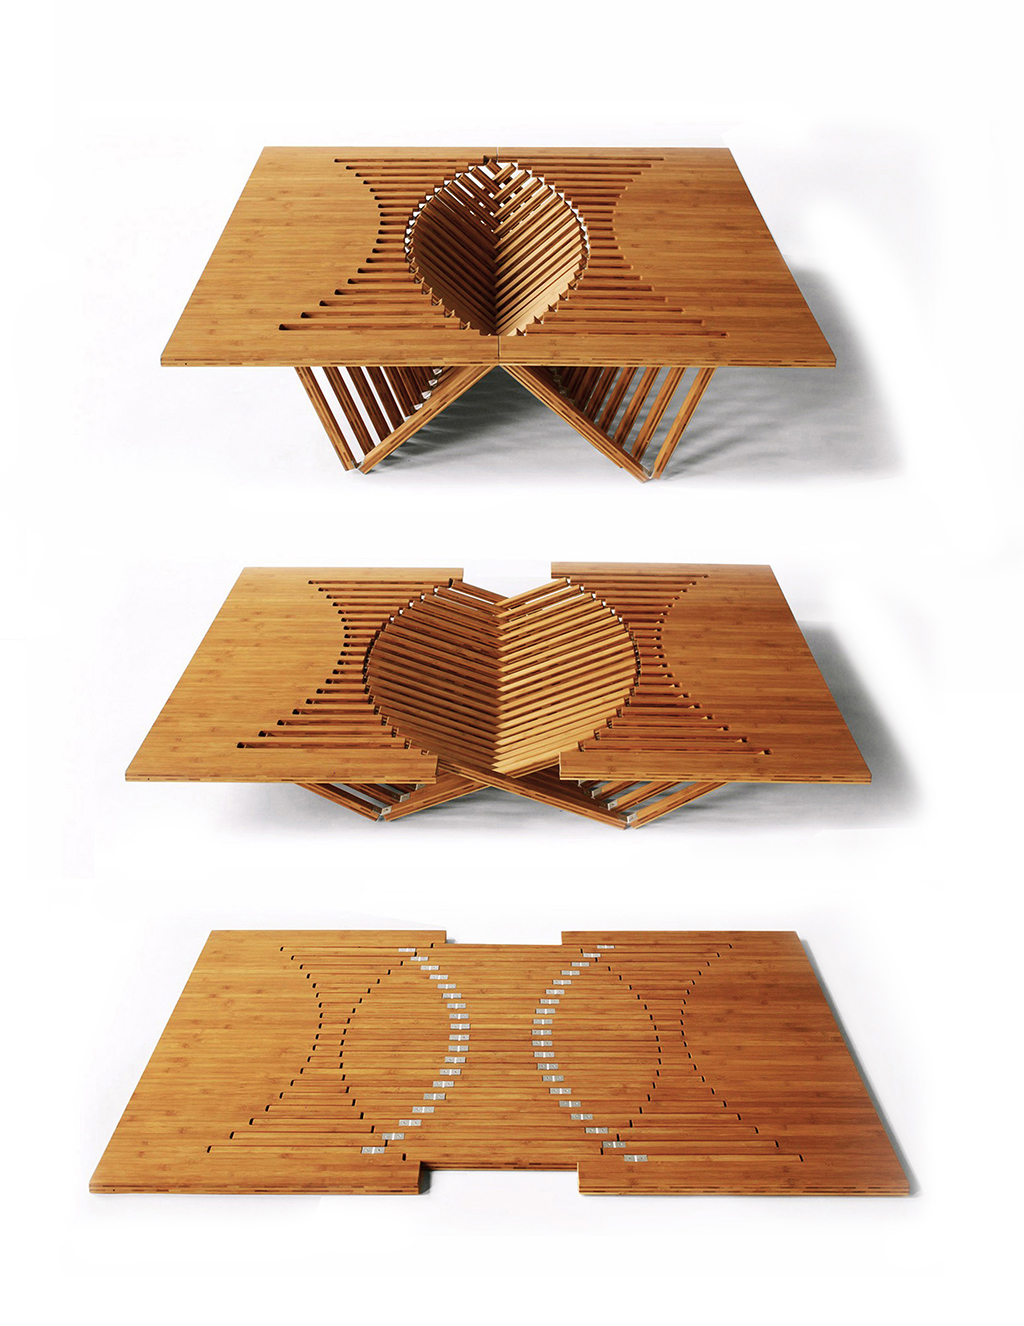 Rising Collection - Foldable Furniture by Robert van Embricqs